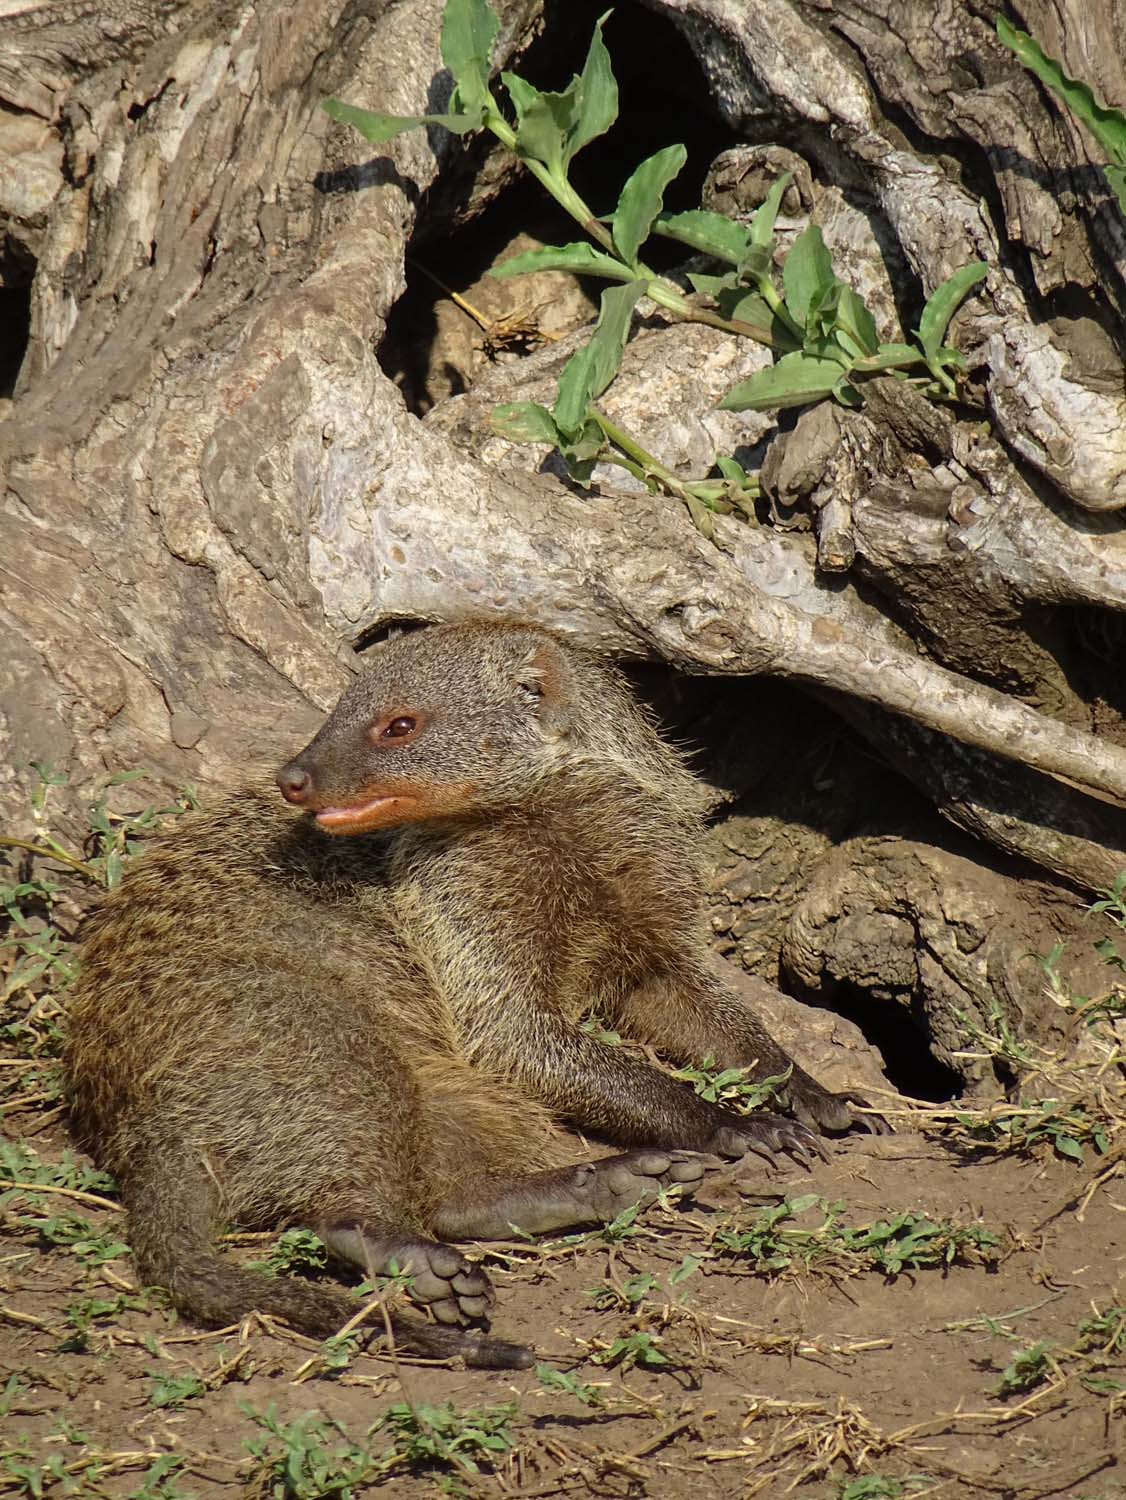 unlike most other mongoose species the banded mongoose lives in large colonies, we watched them for a long time before they set off into the distance